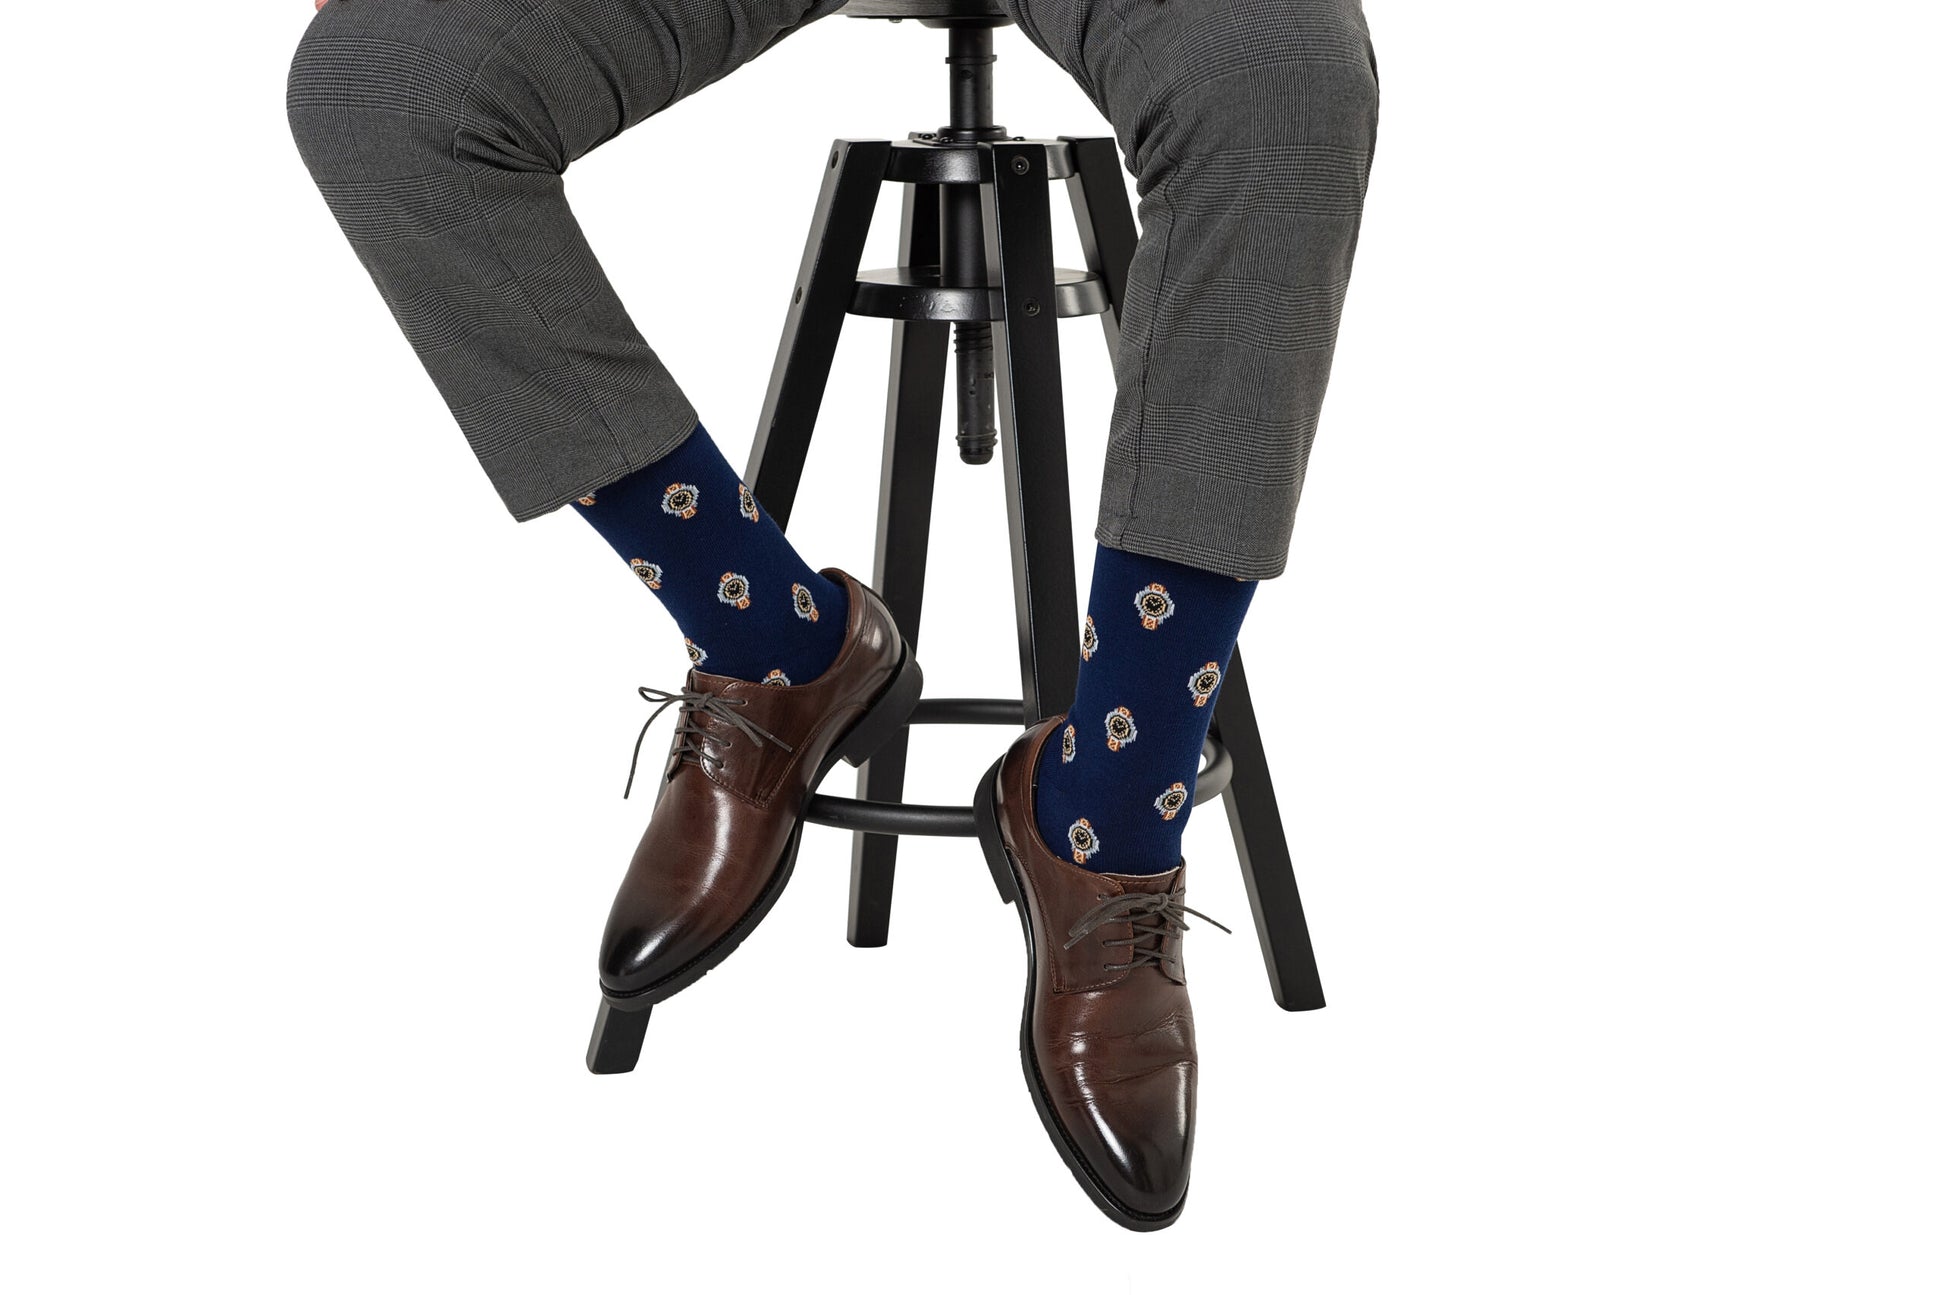 A person seated wearing brown leather shoes and blue Watch Socks with owl designs, perched on a black stool, showing only the lower half of their body, exudes timeless elegance.